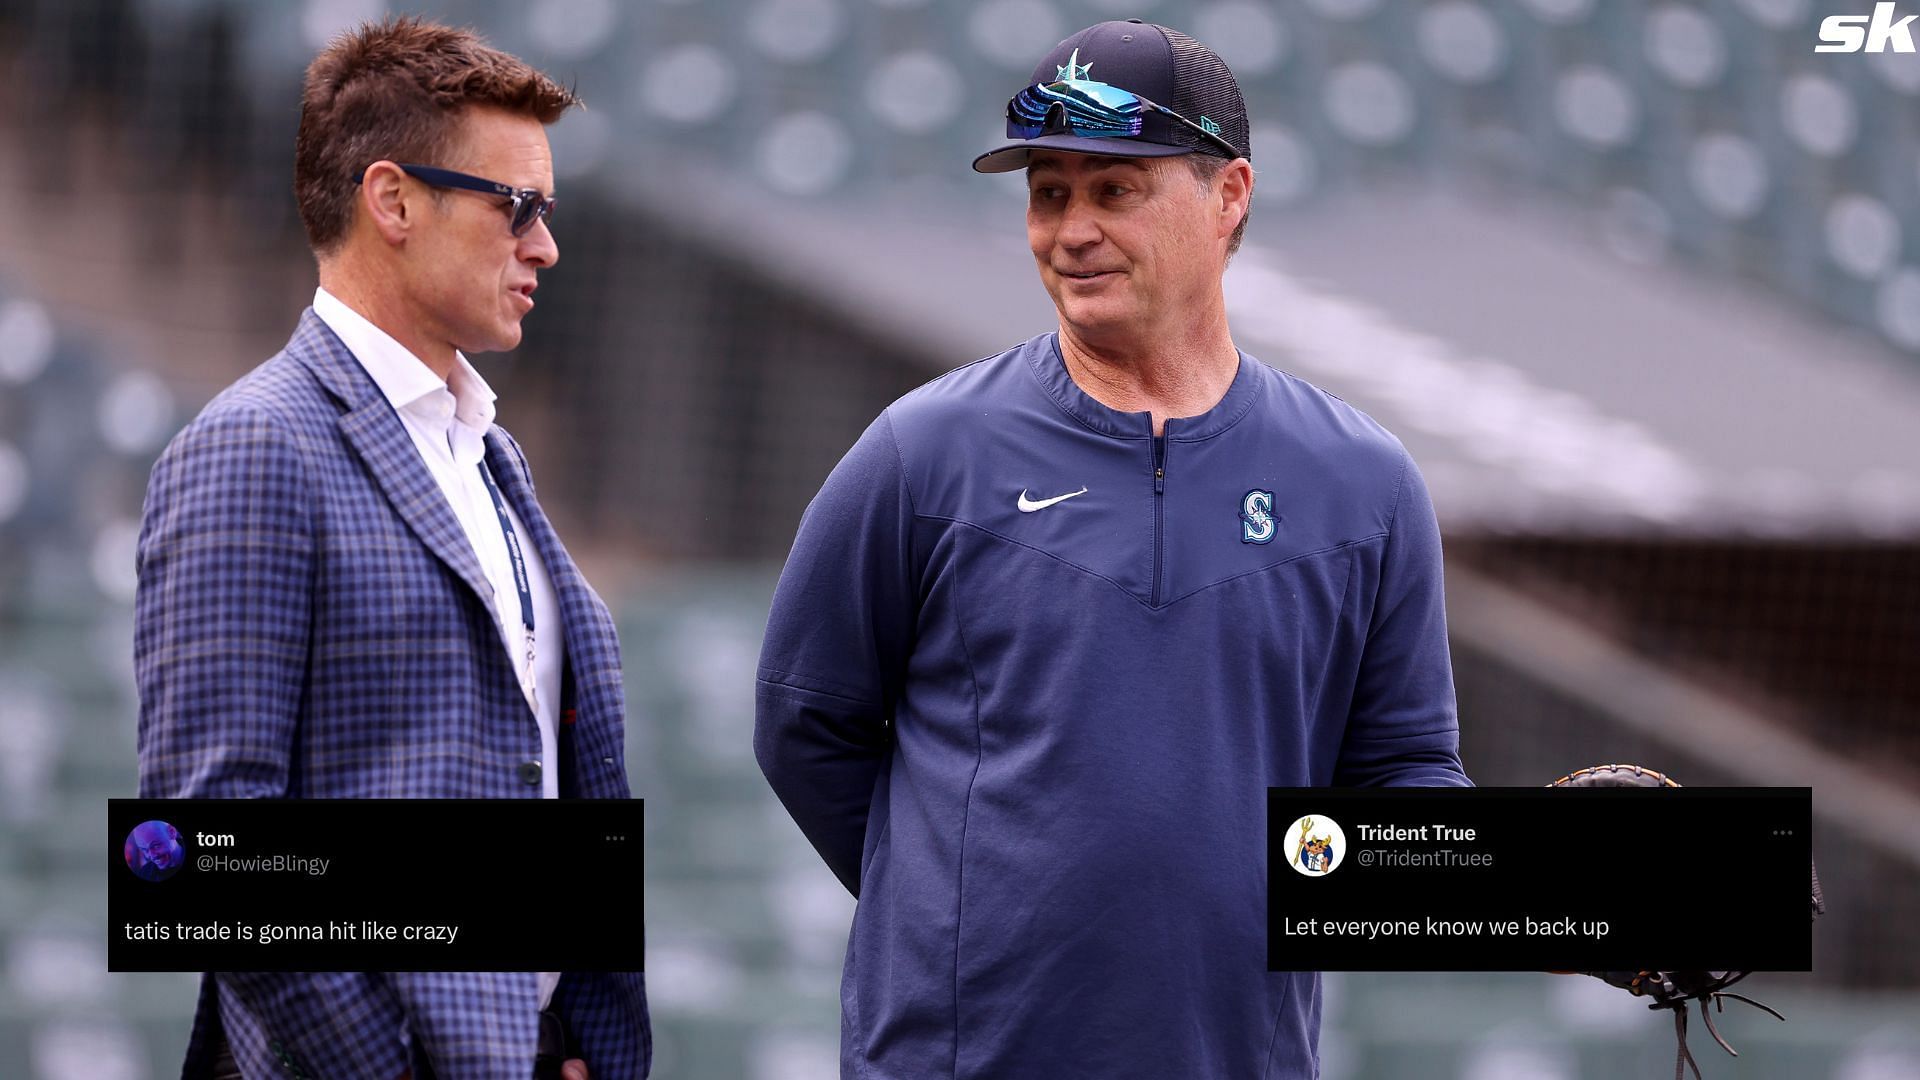 President of baseball operations Jerry Dipoto speaks with manager Scott Servais of the Seattle Mariners during Opening Day